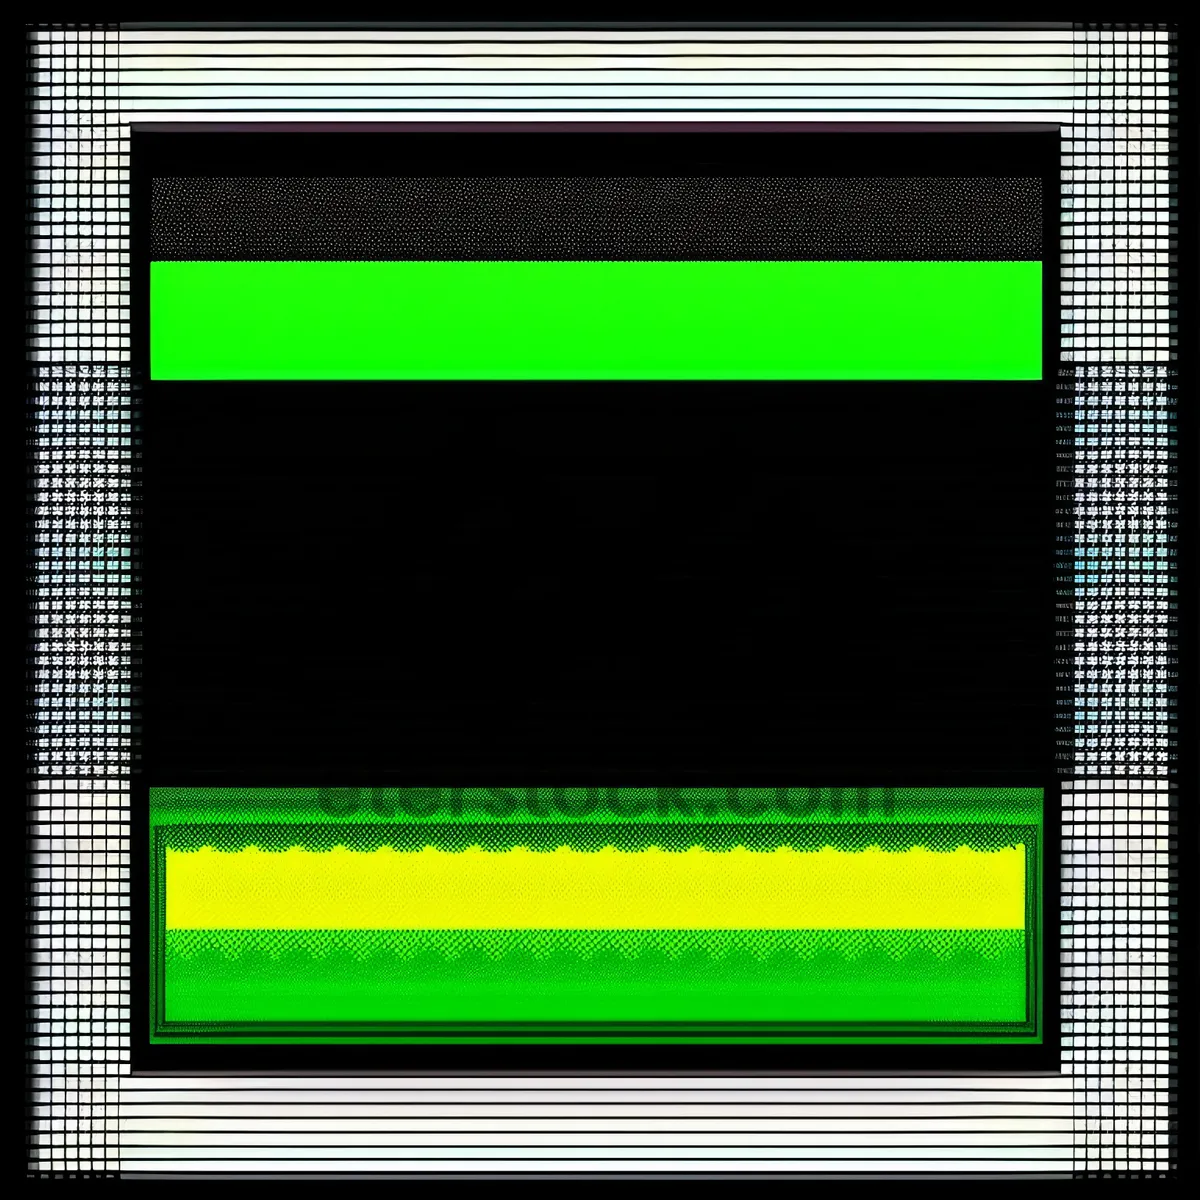 Picture of Modern Digital LCD Texture with Grid Design